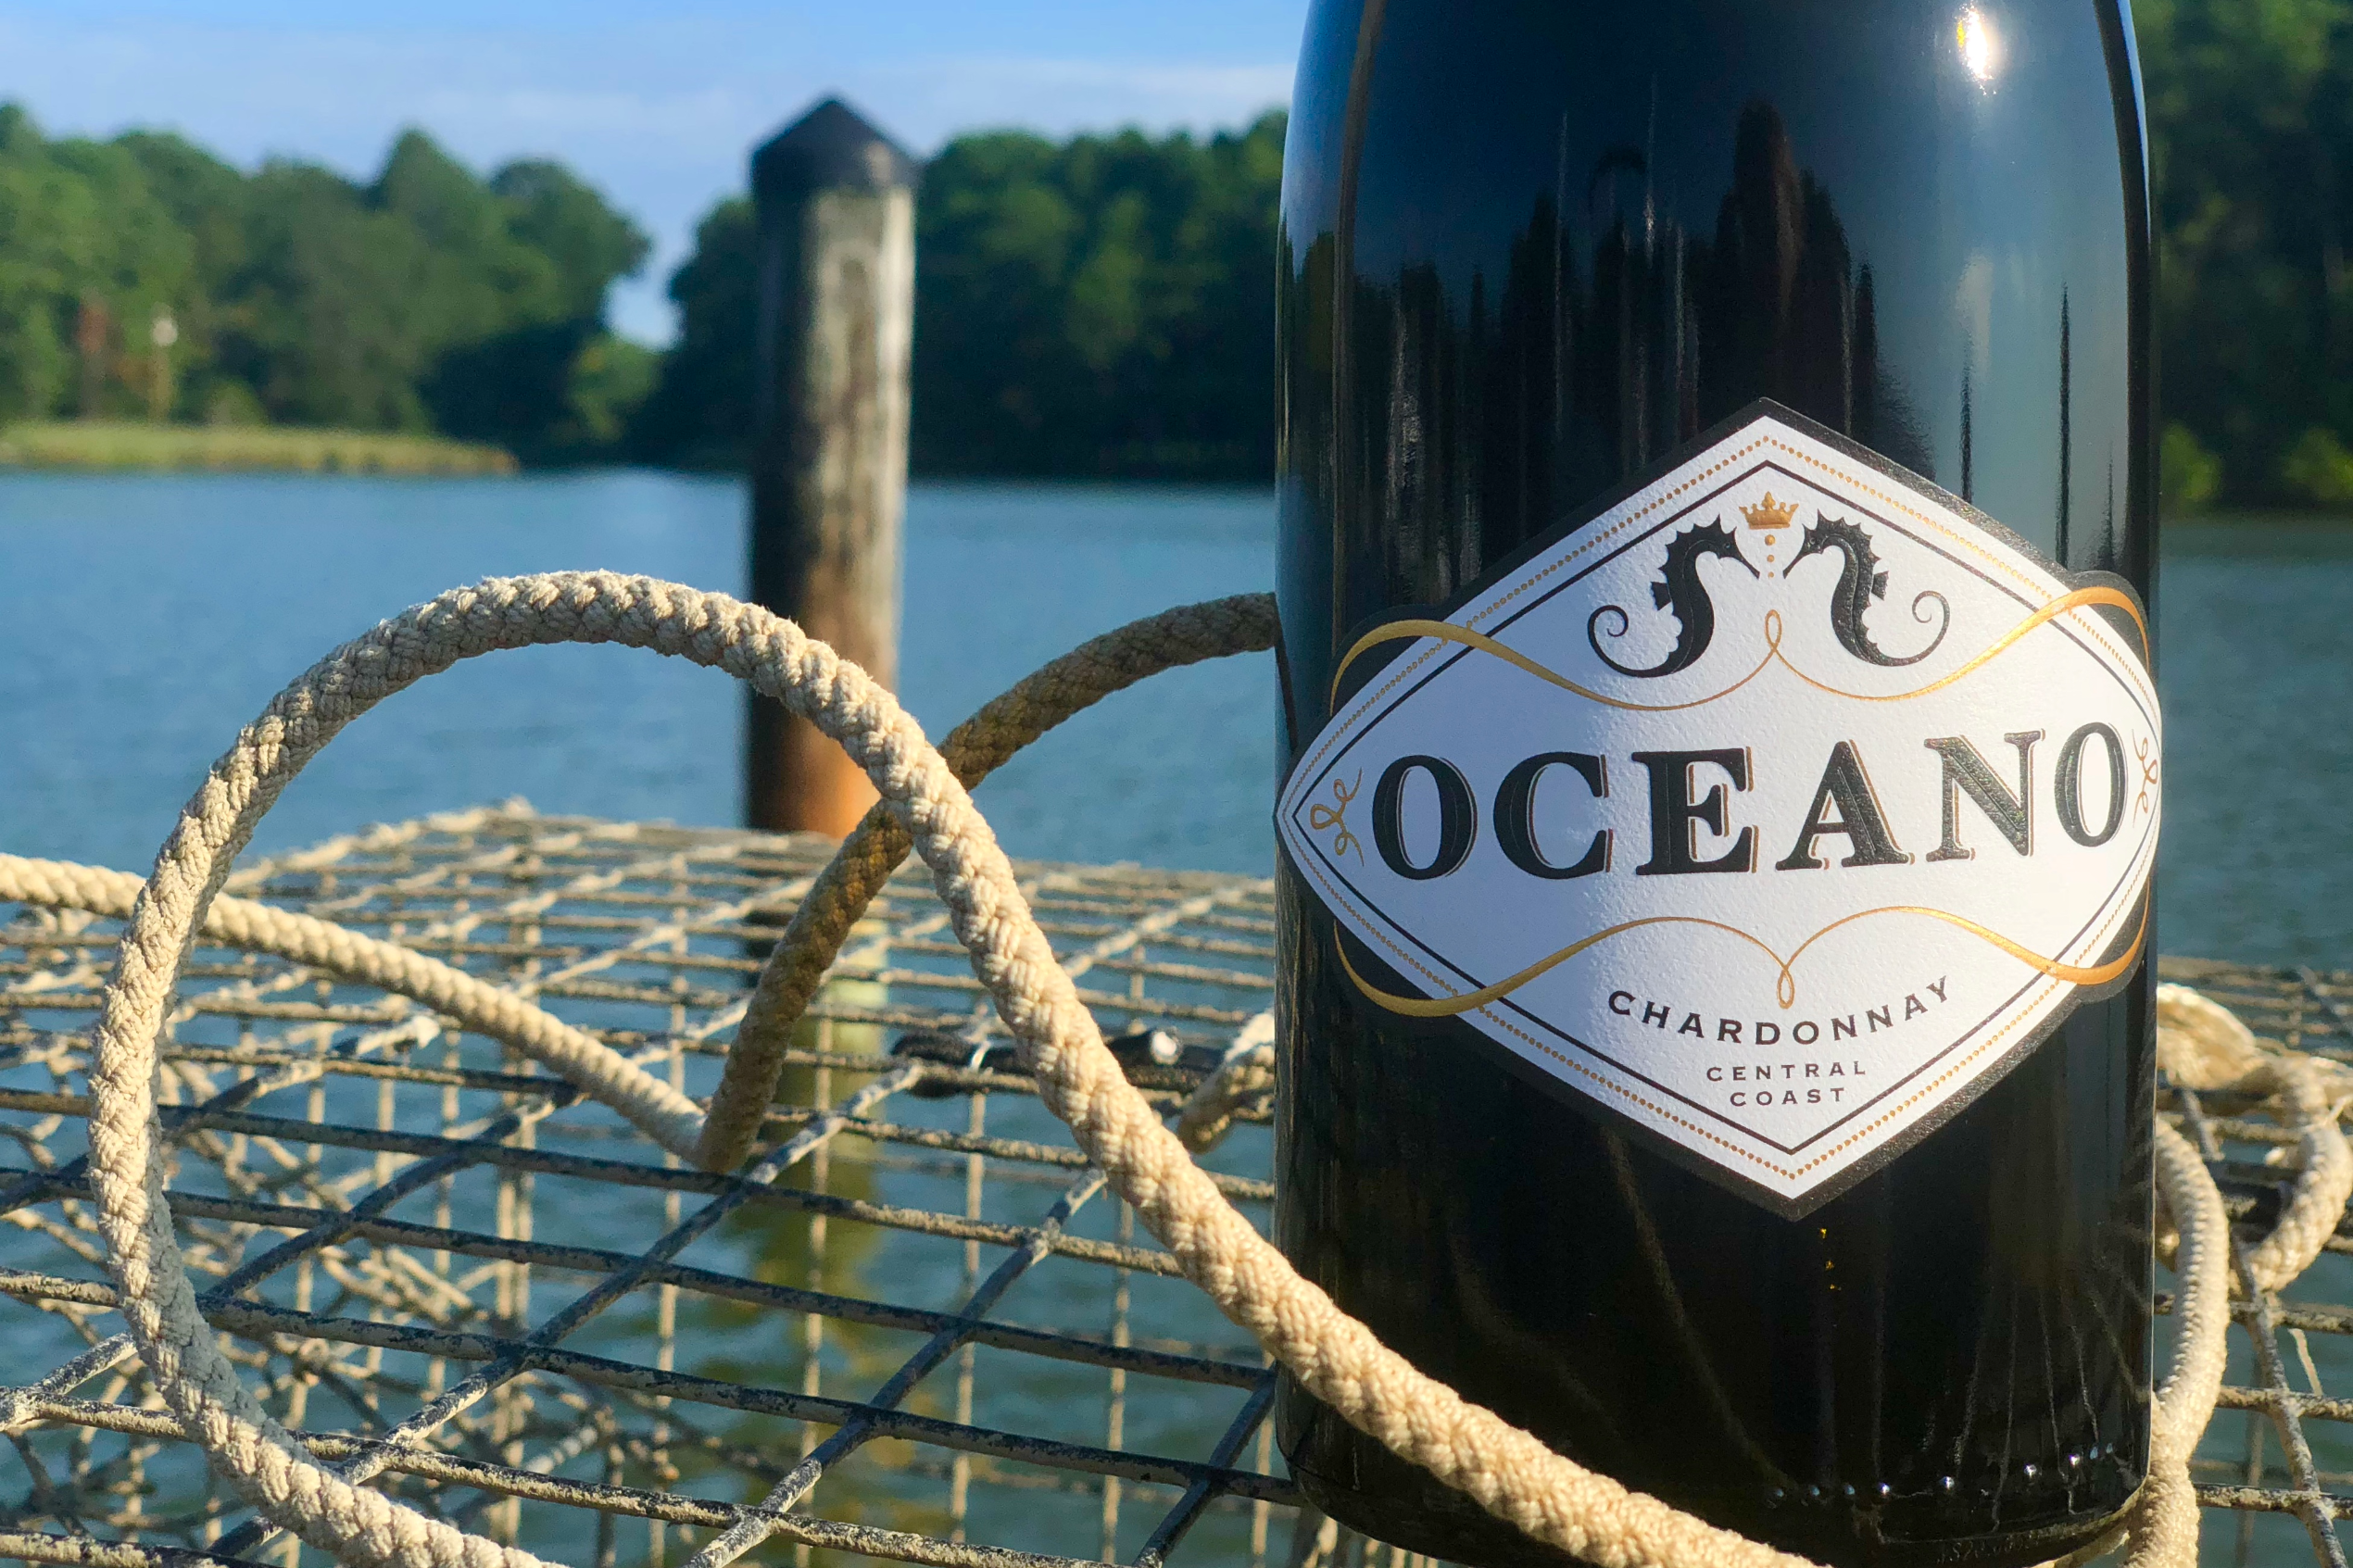 Oceano Chardonnay bottle on top of crab cage